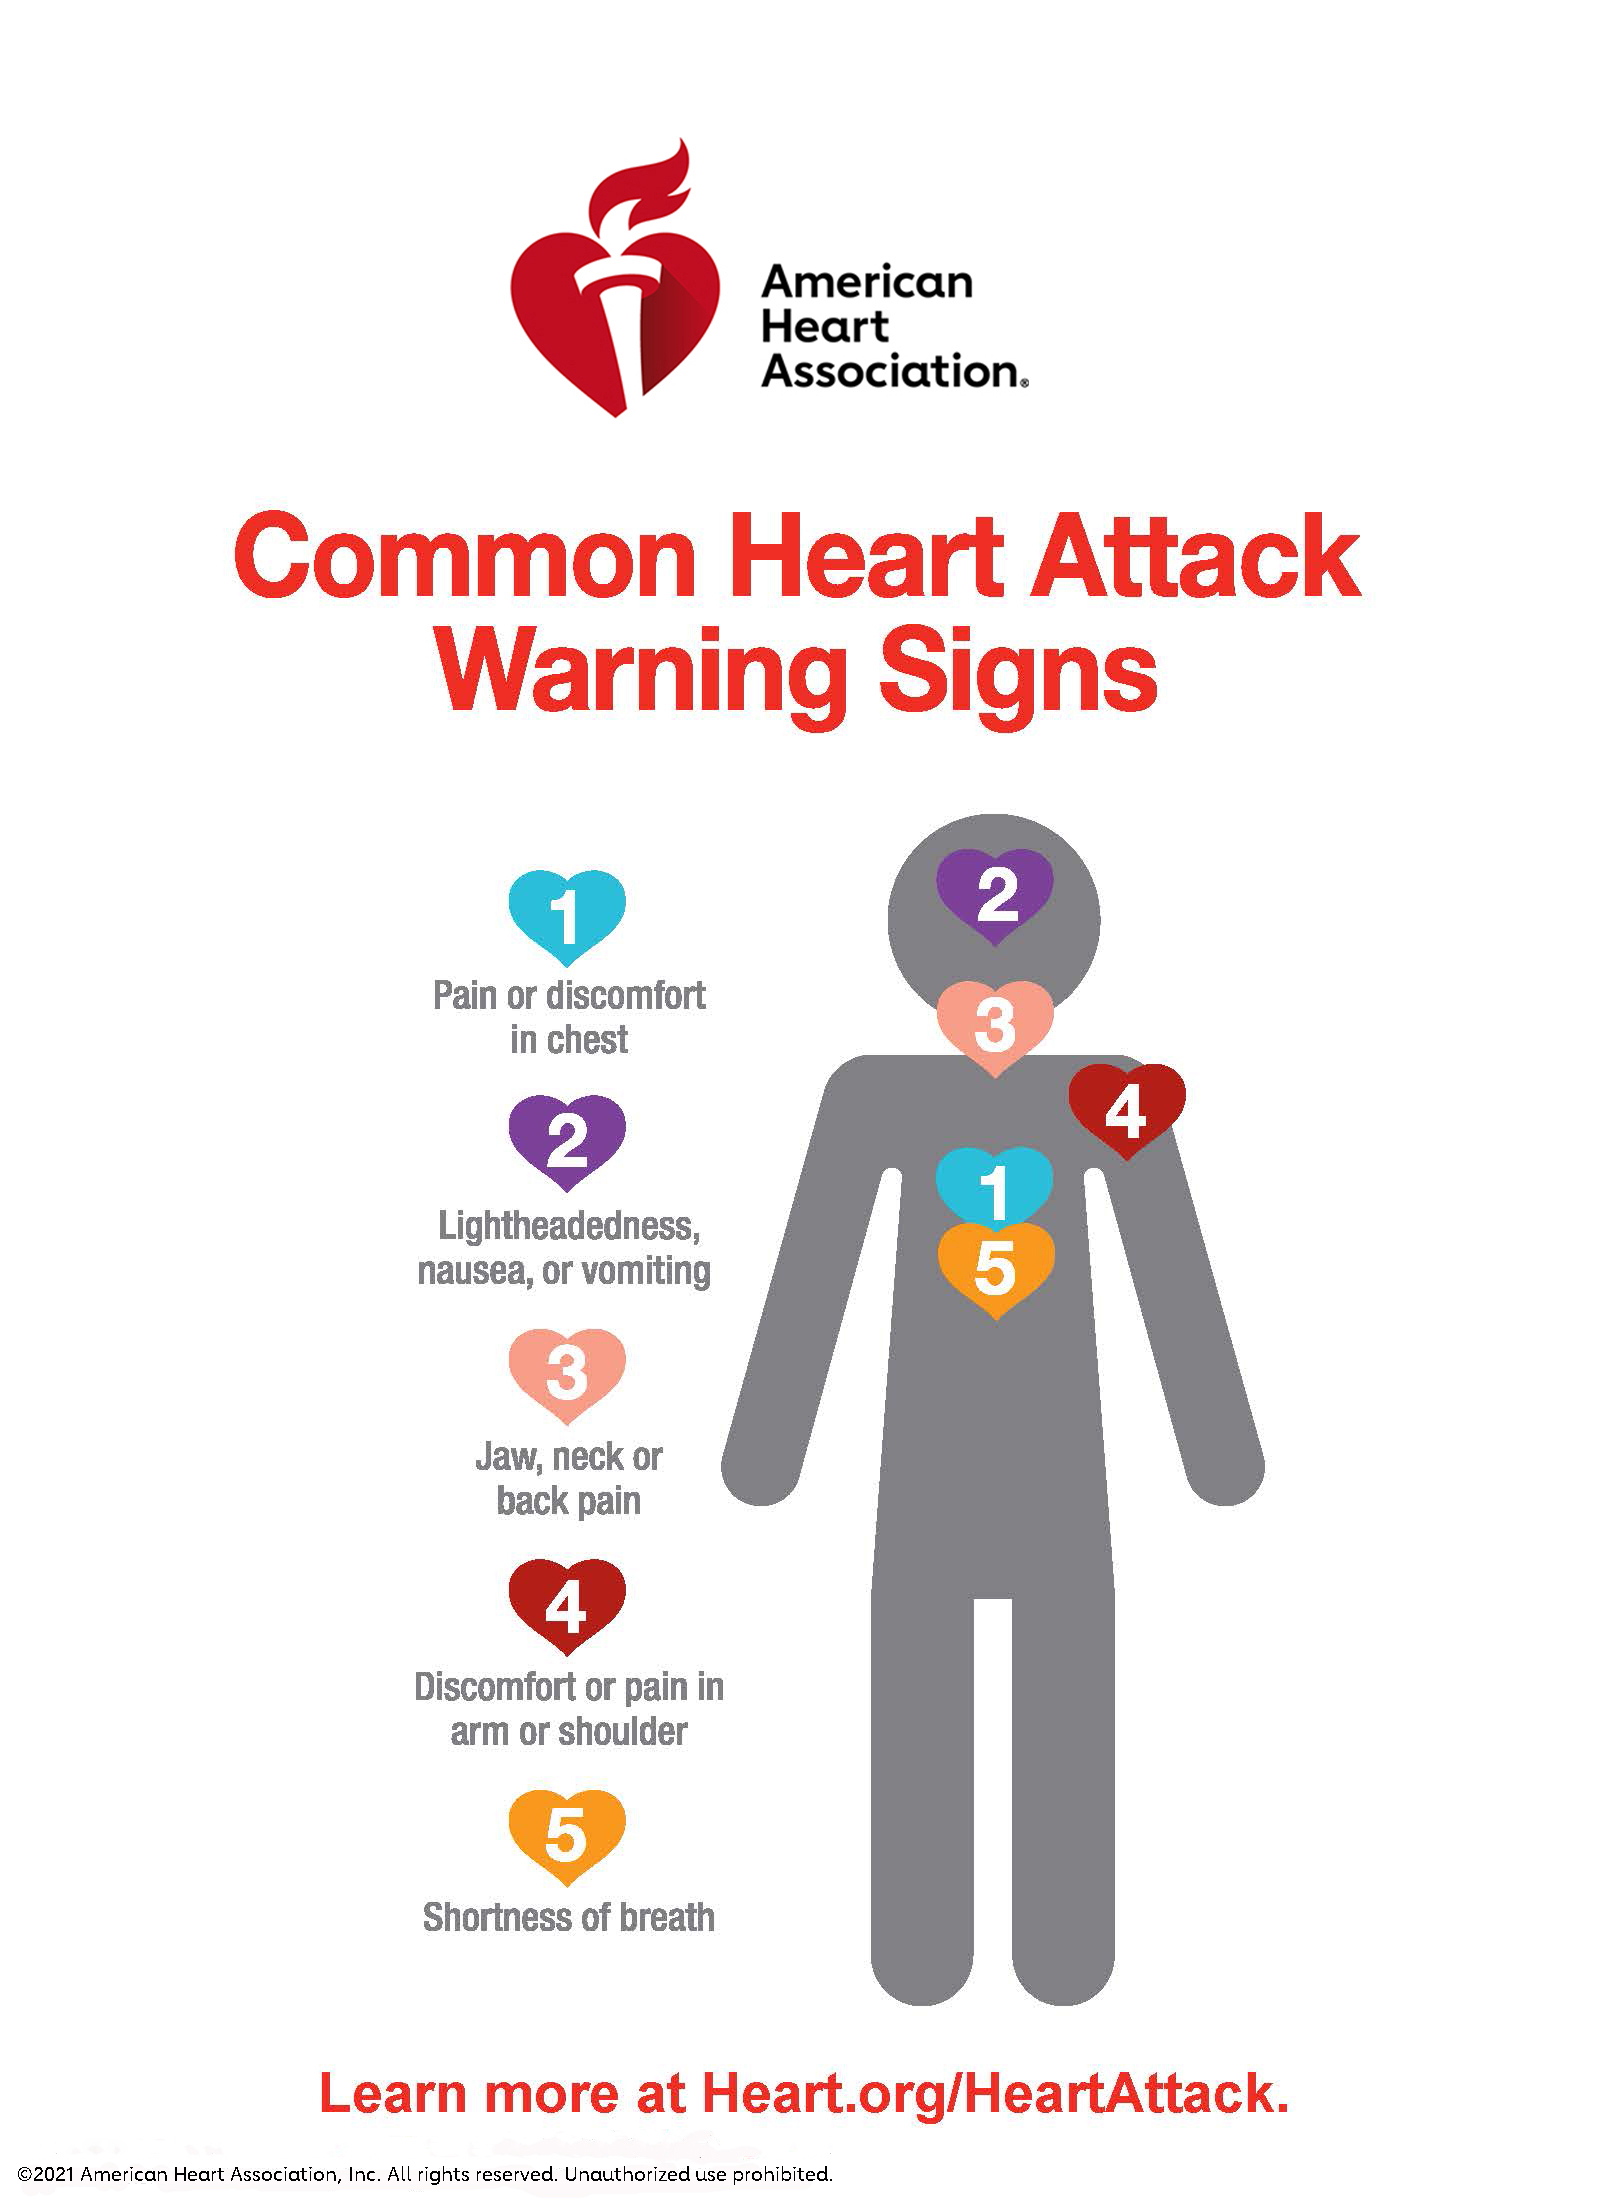 Graphic courtesy of the American Heart Association.